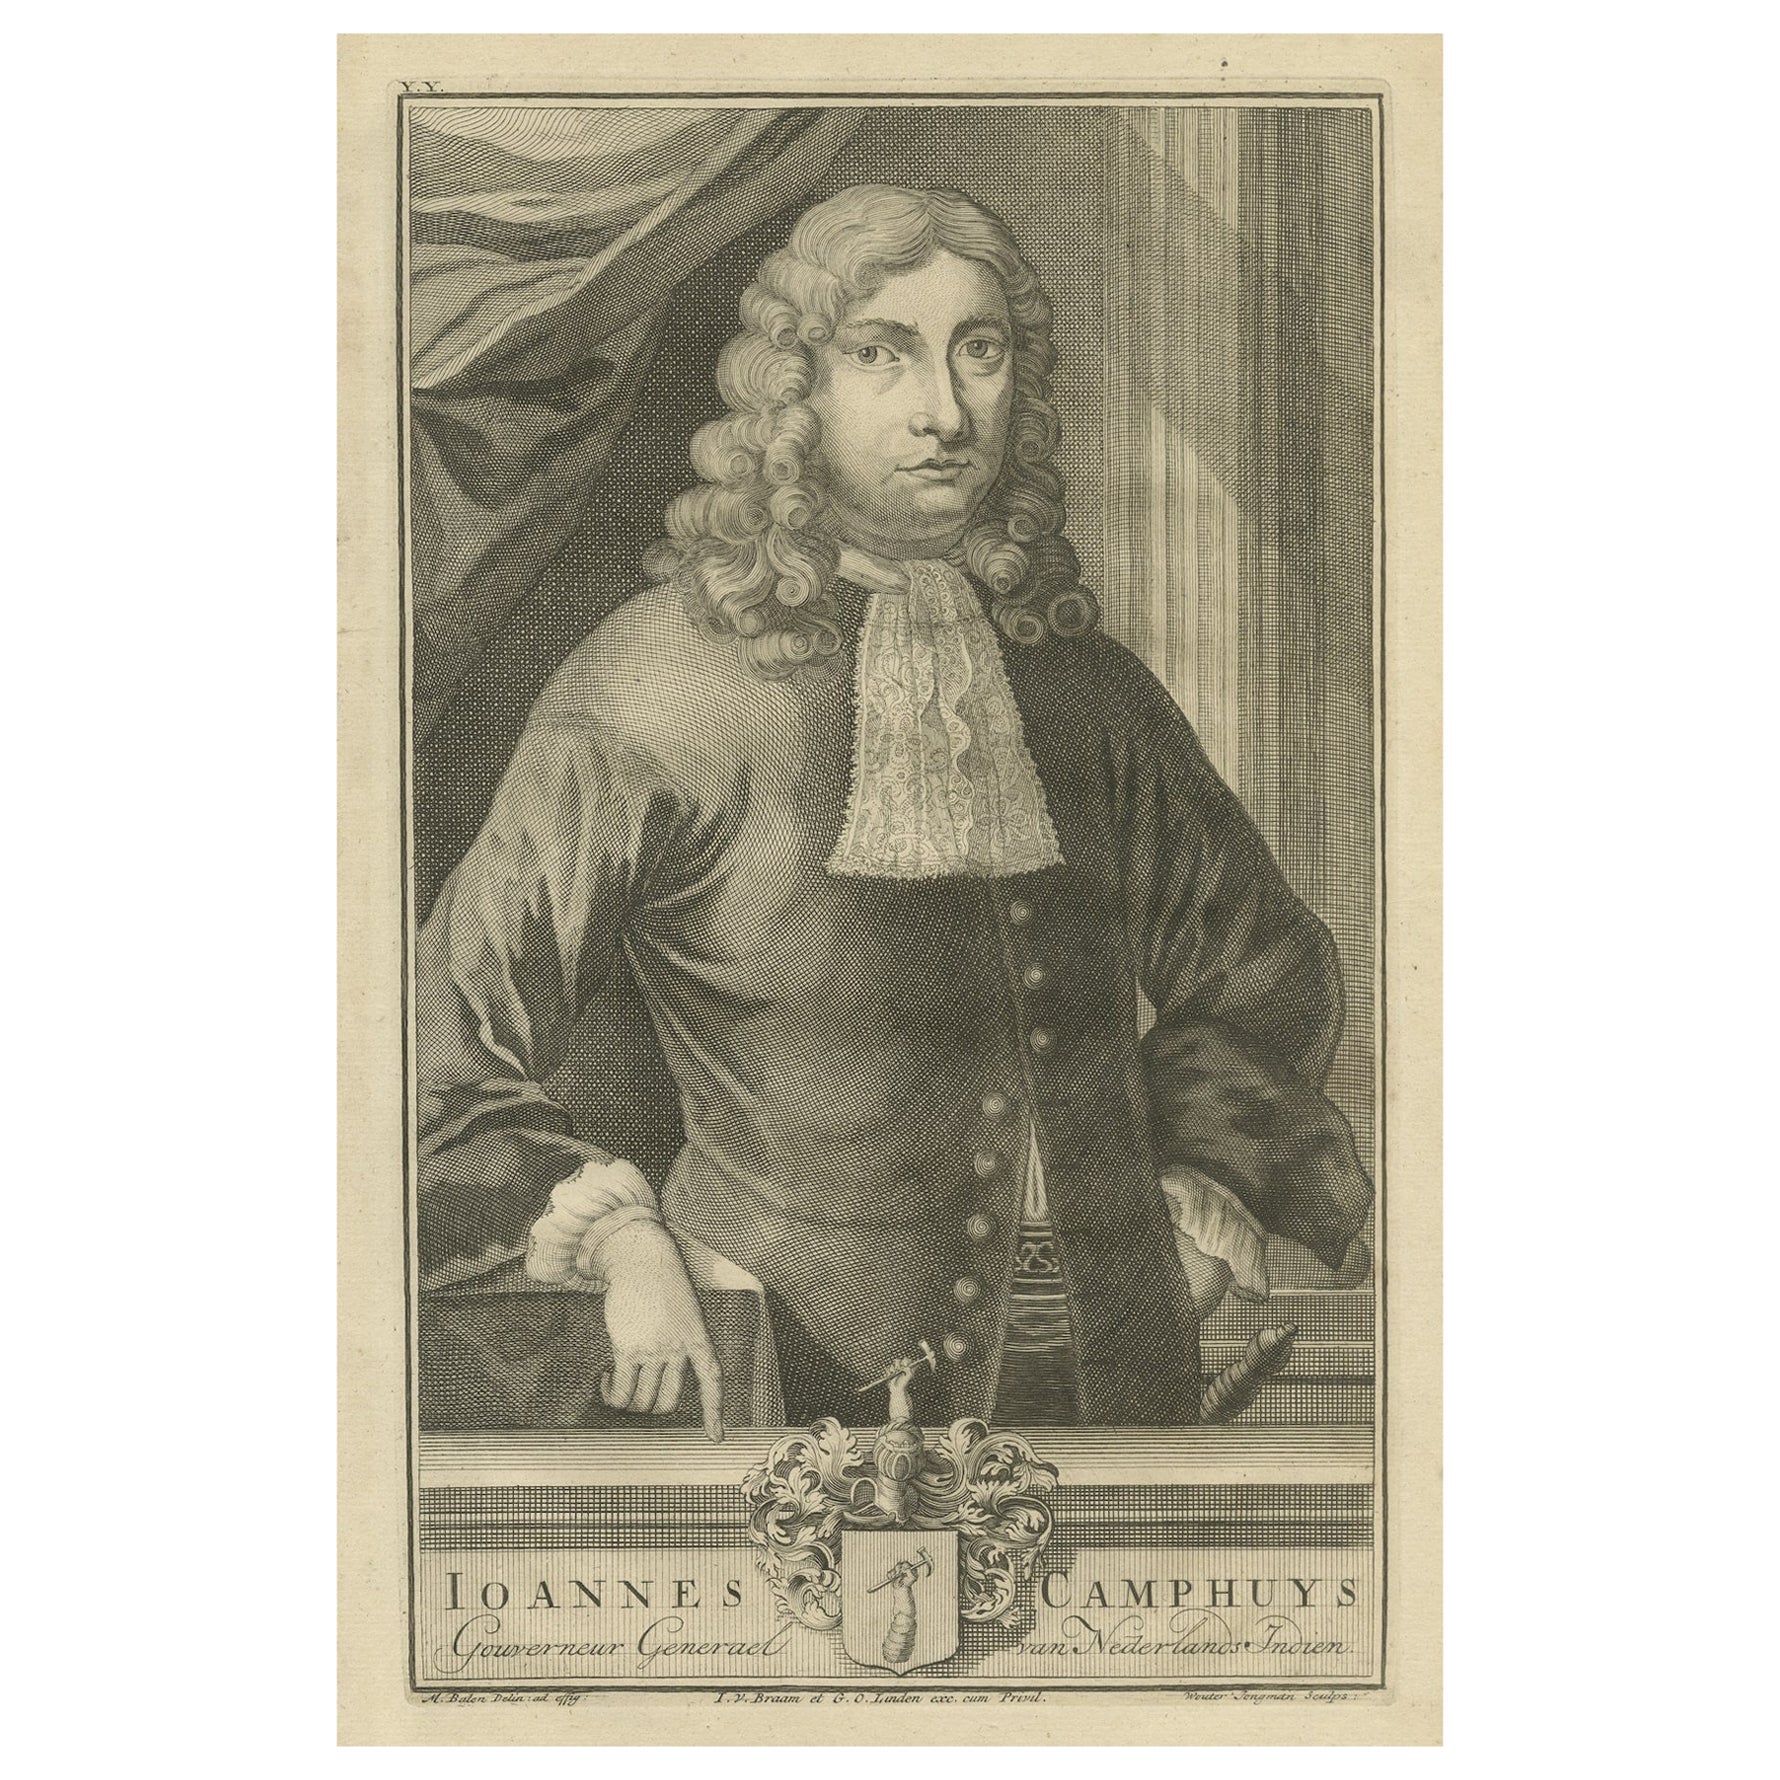 Ioannes Camphuys: Venerable Governor-General of the VOC, Dutch East Indies, 1724 For Sale